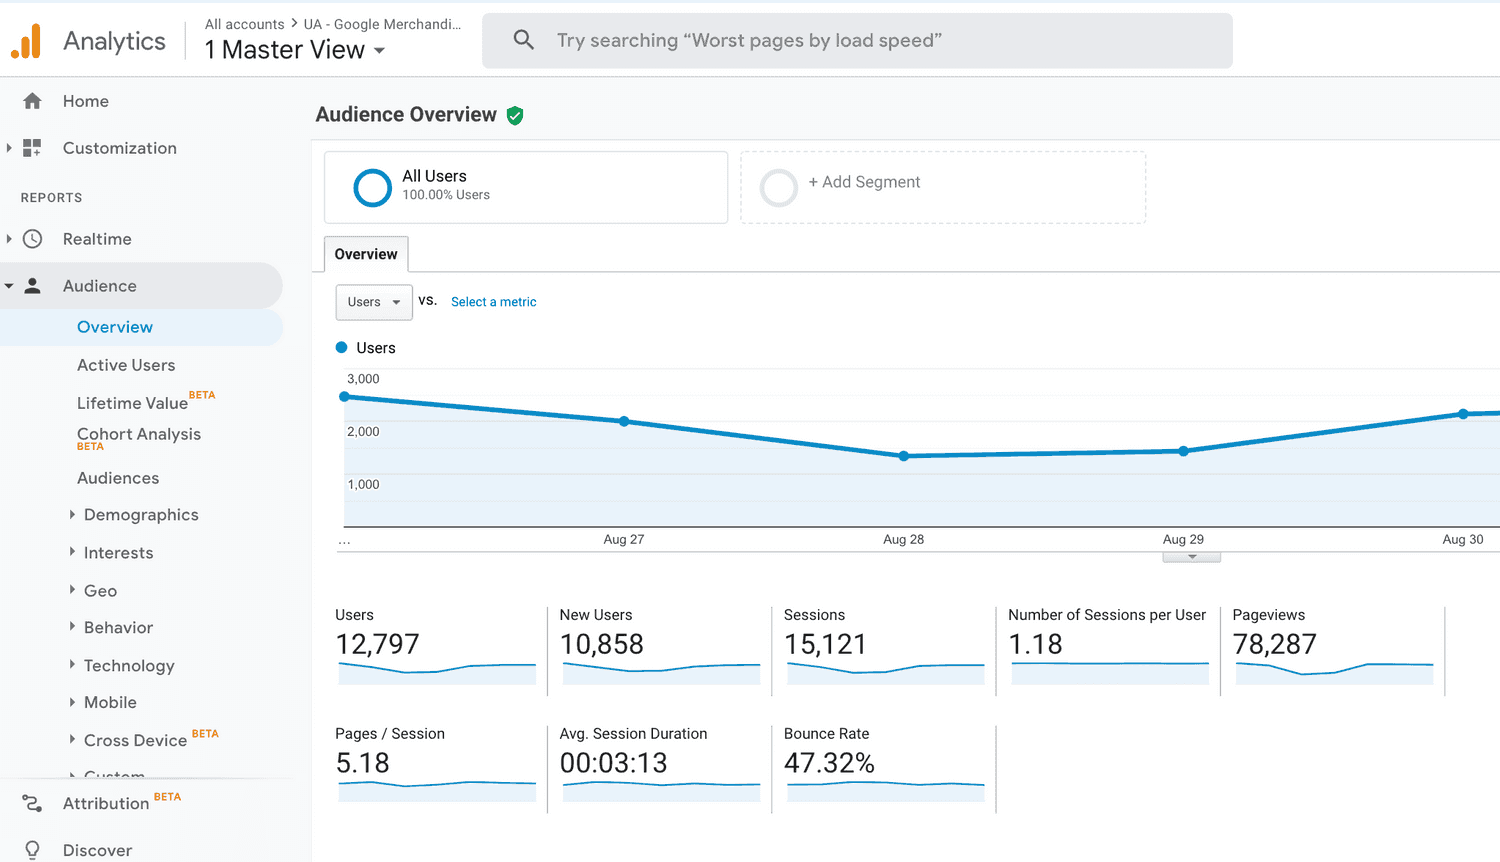 Results for a webpage from Google Analytics